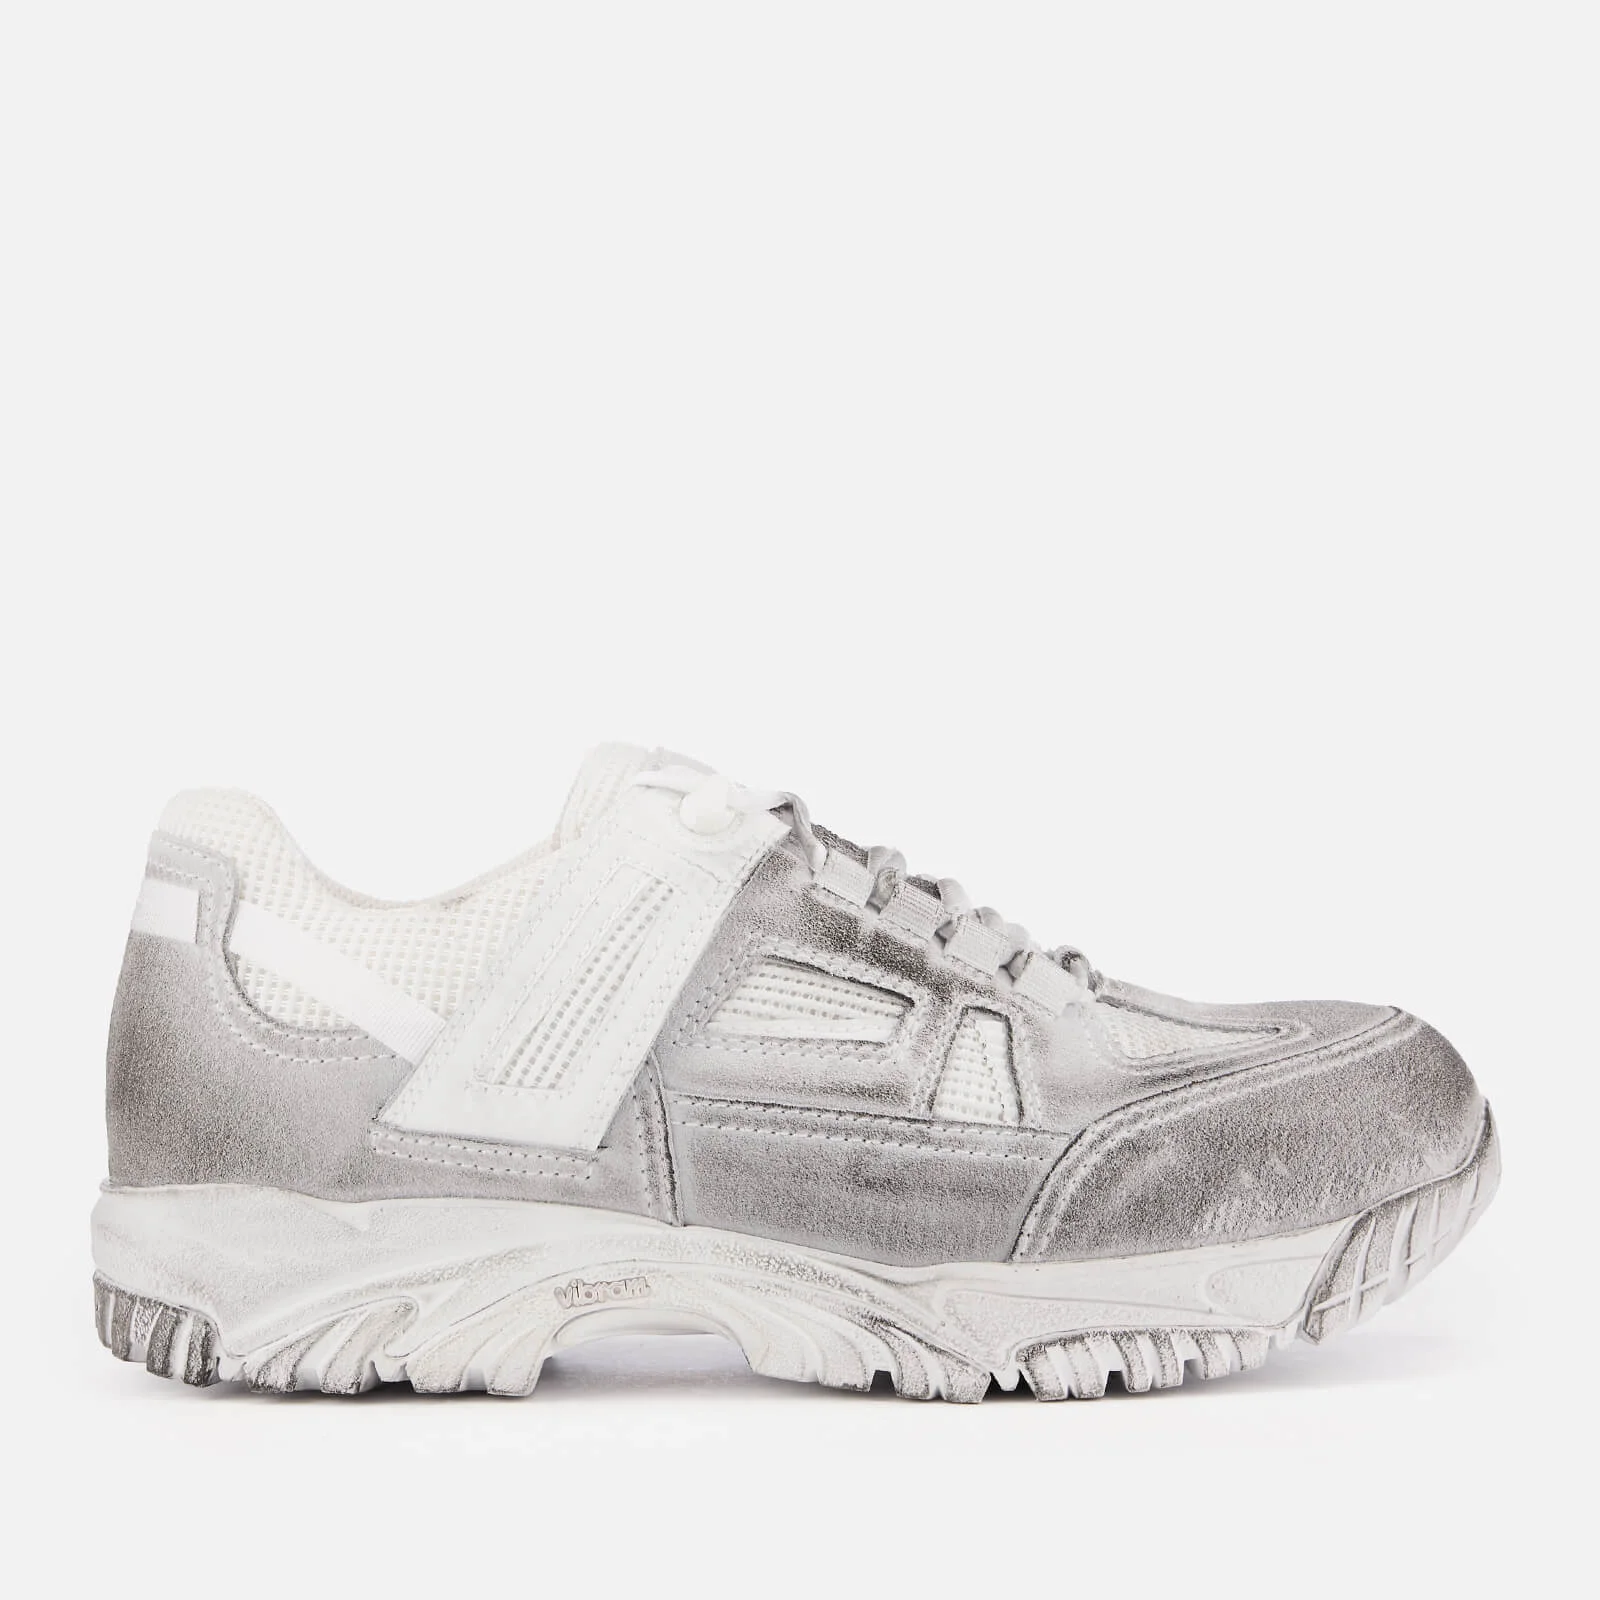 Maison Margiela Men's Security Trainers - Dirty White Image 1